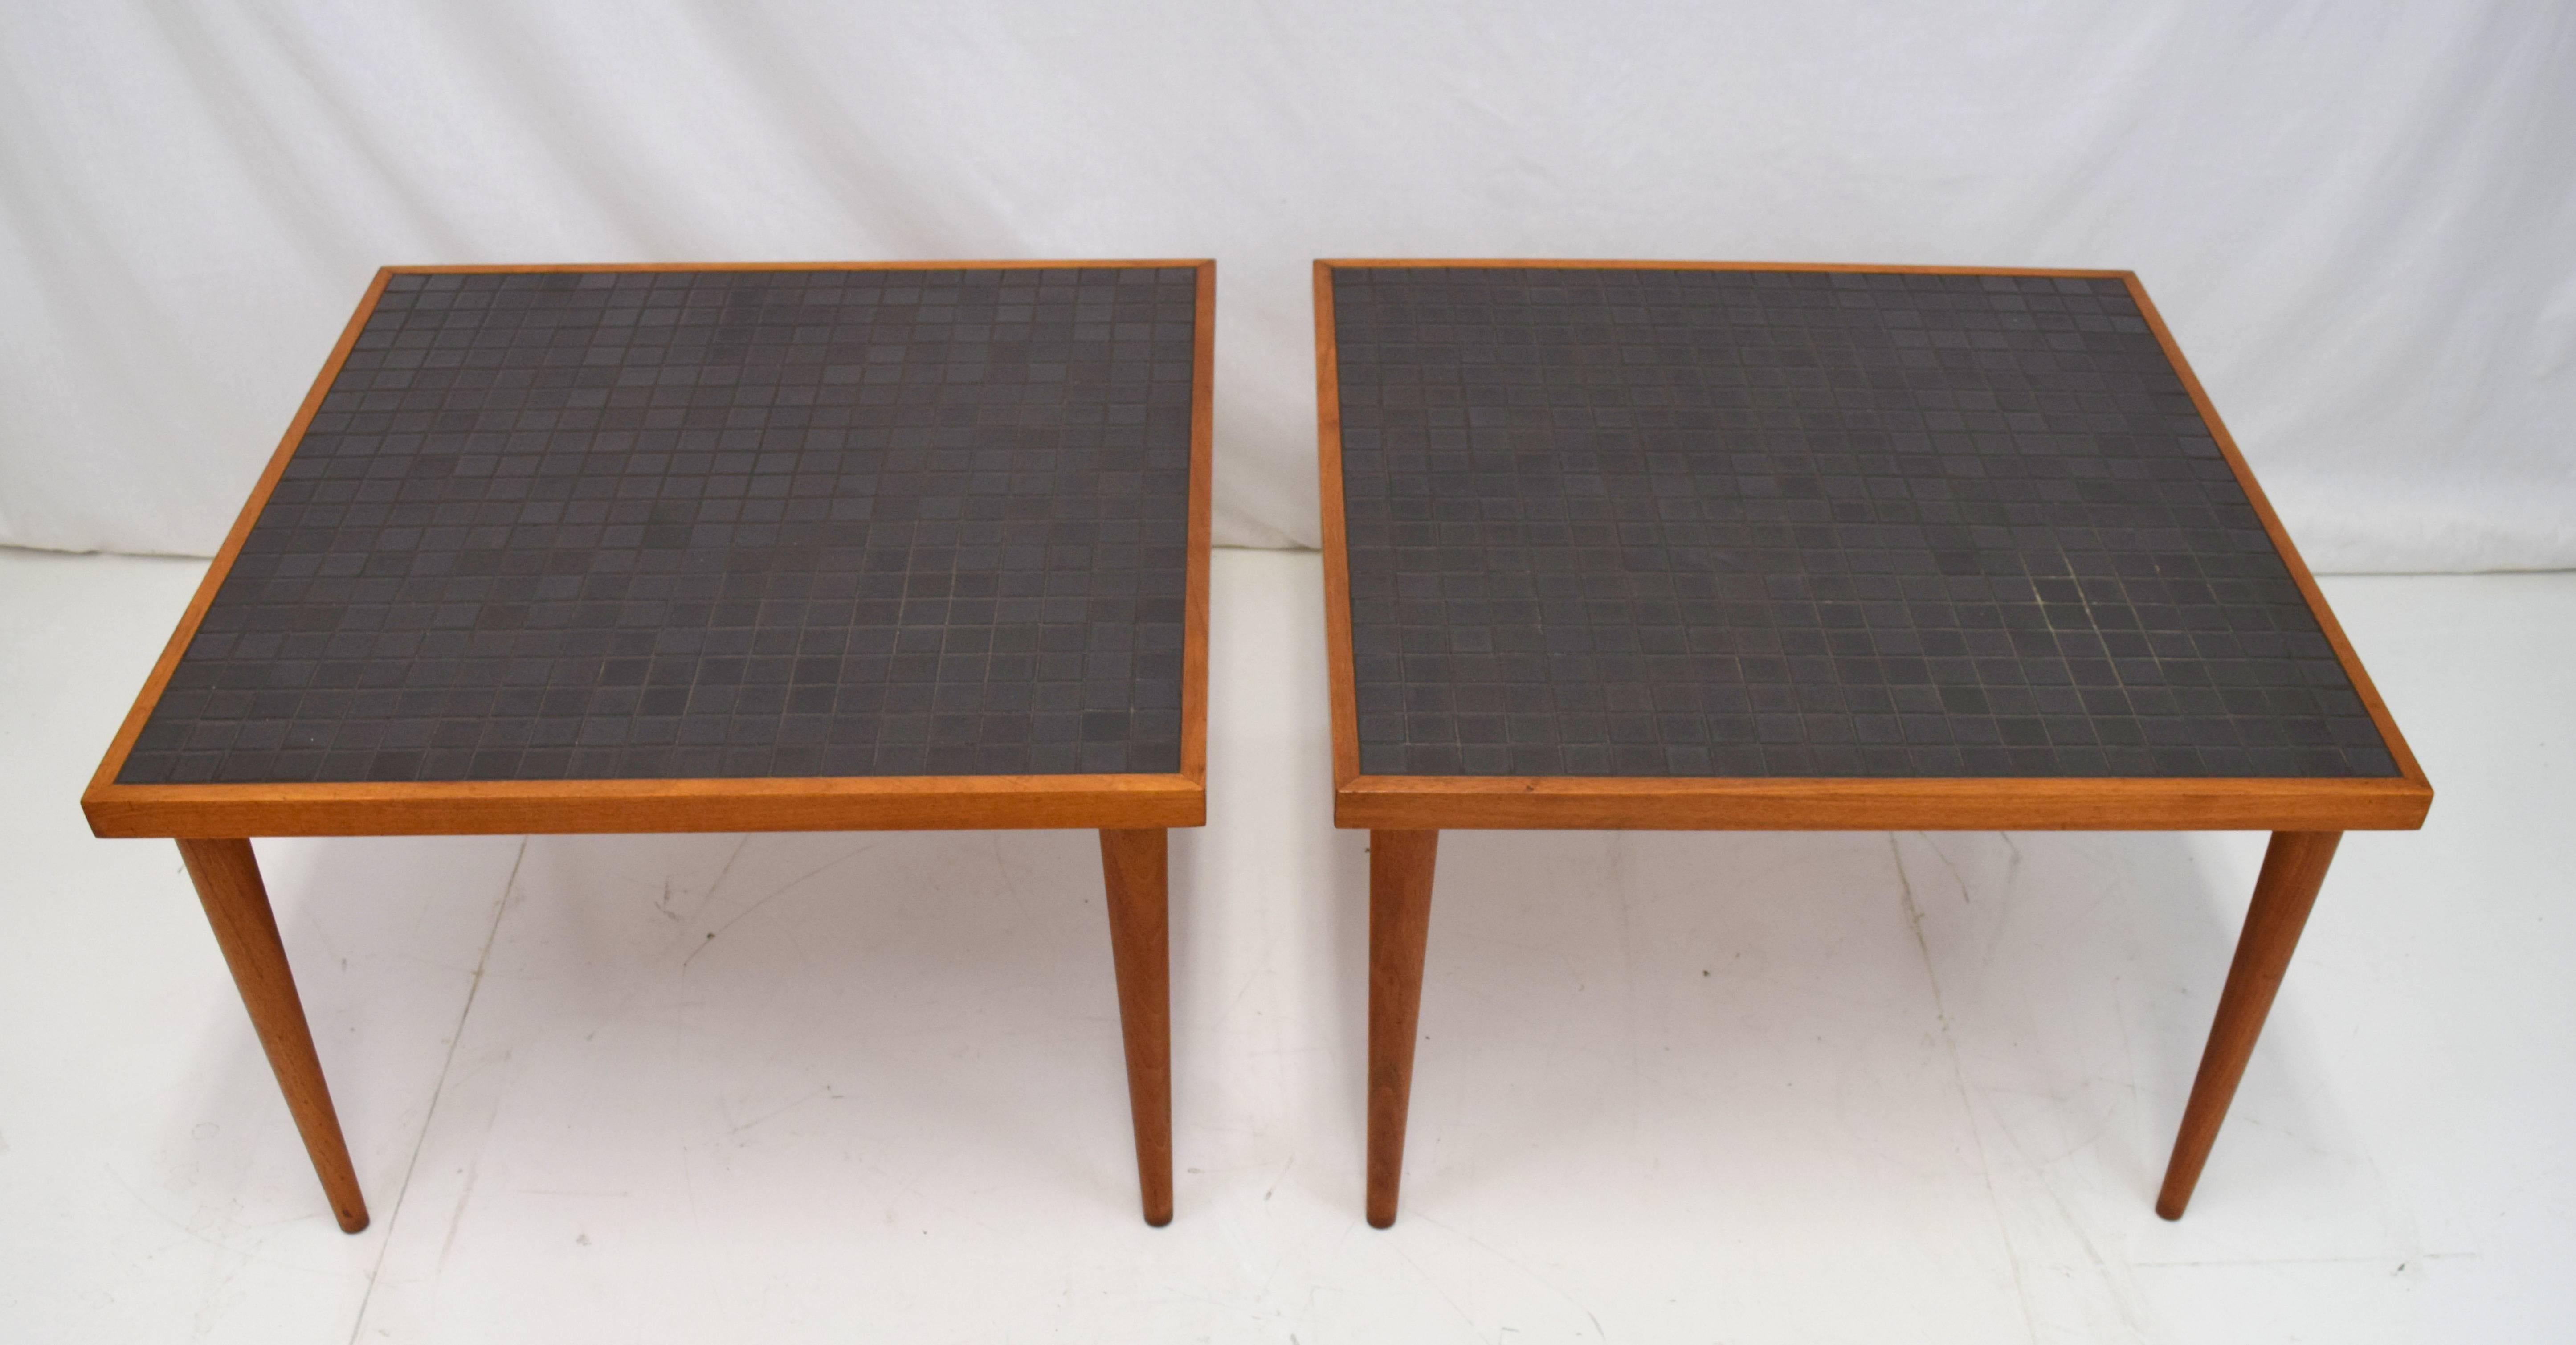 Simple yet elegant pair of Martz tile end tables for Marshall Studios. Walnut frame with tall conical legs and dark charcoal toned tile top. Tiles 1 1/4